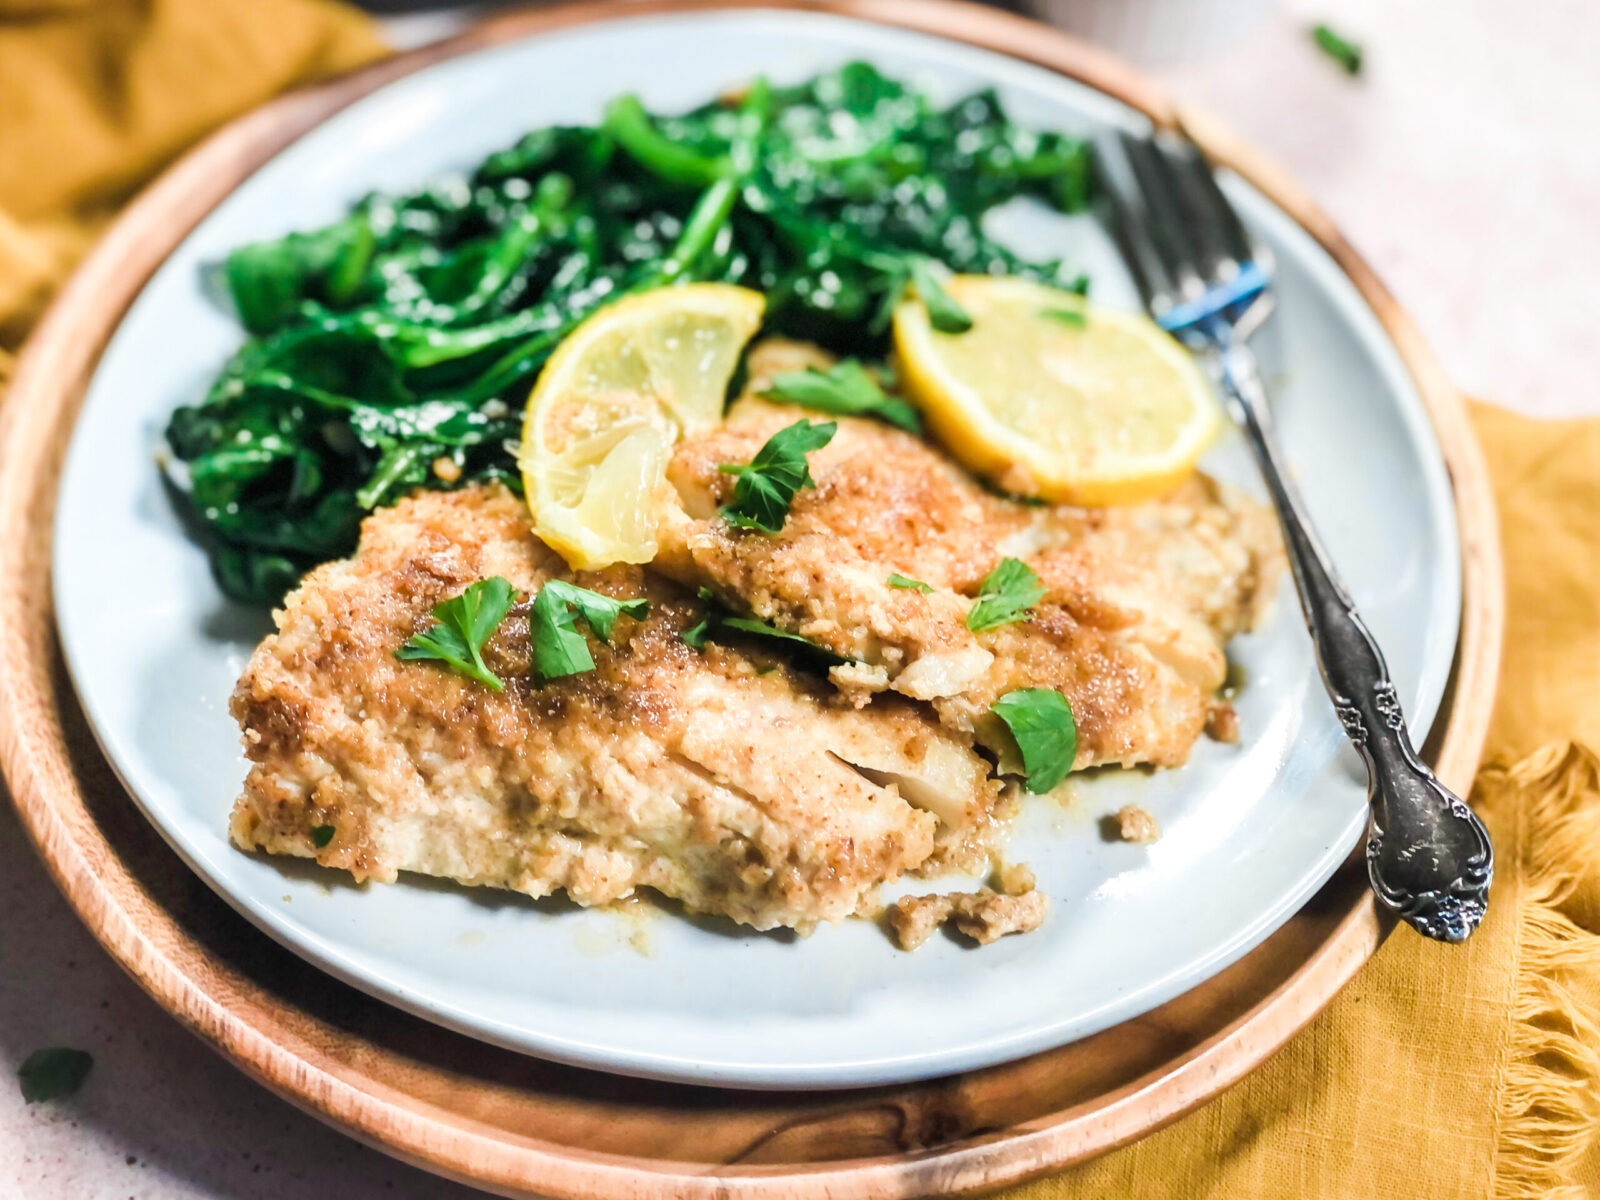 A plate of baked cod garnished with chopped fresh parsley and two lemon slices, with sautéed spinach and a silver fork, placed on a wooden charger plate.